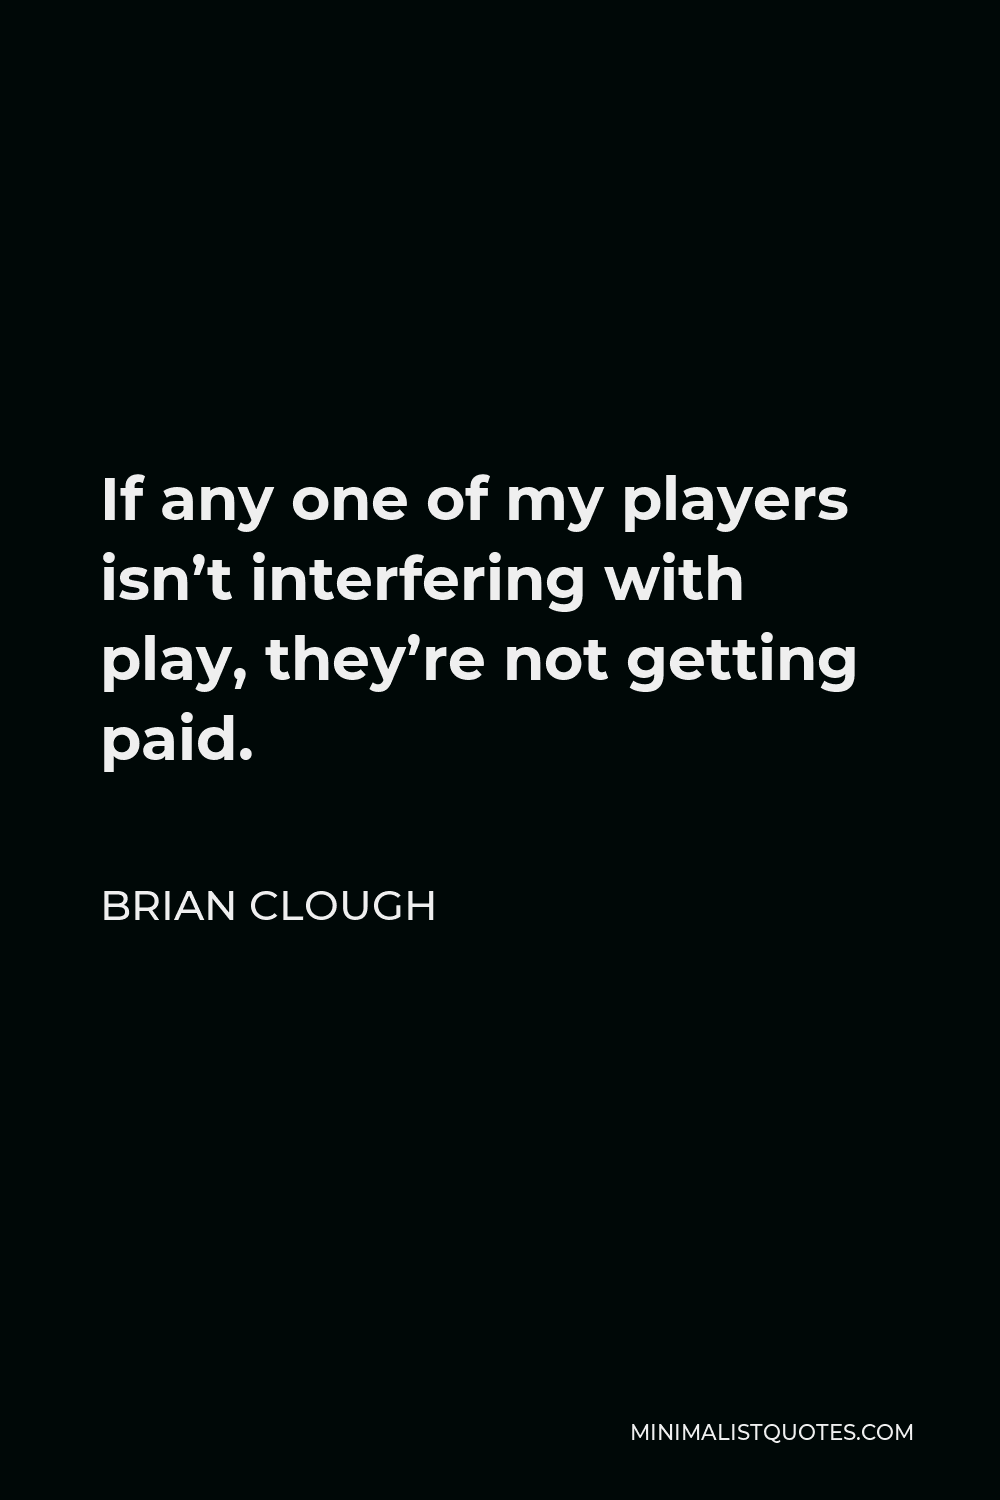 Brian Clough Quote - If any one of my players isn’t interfering with play, they’re not getting paid.